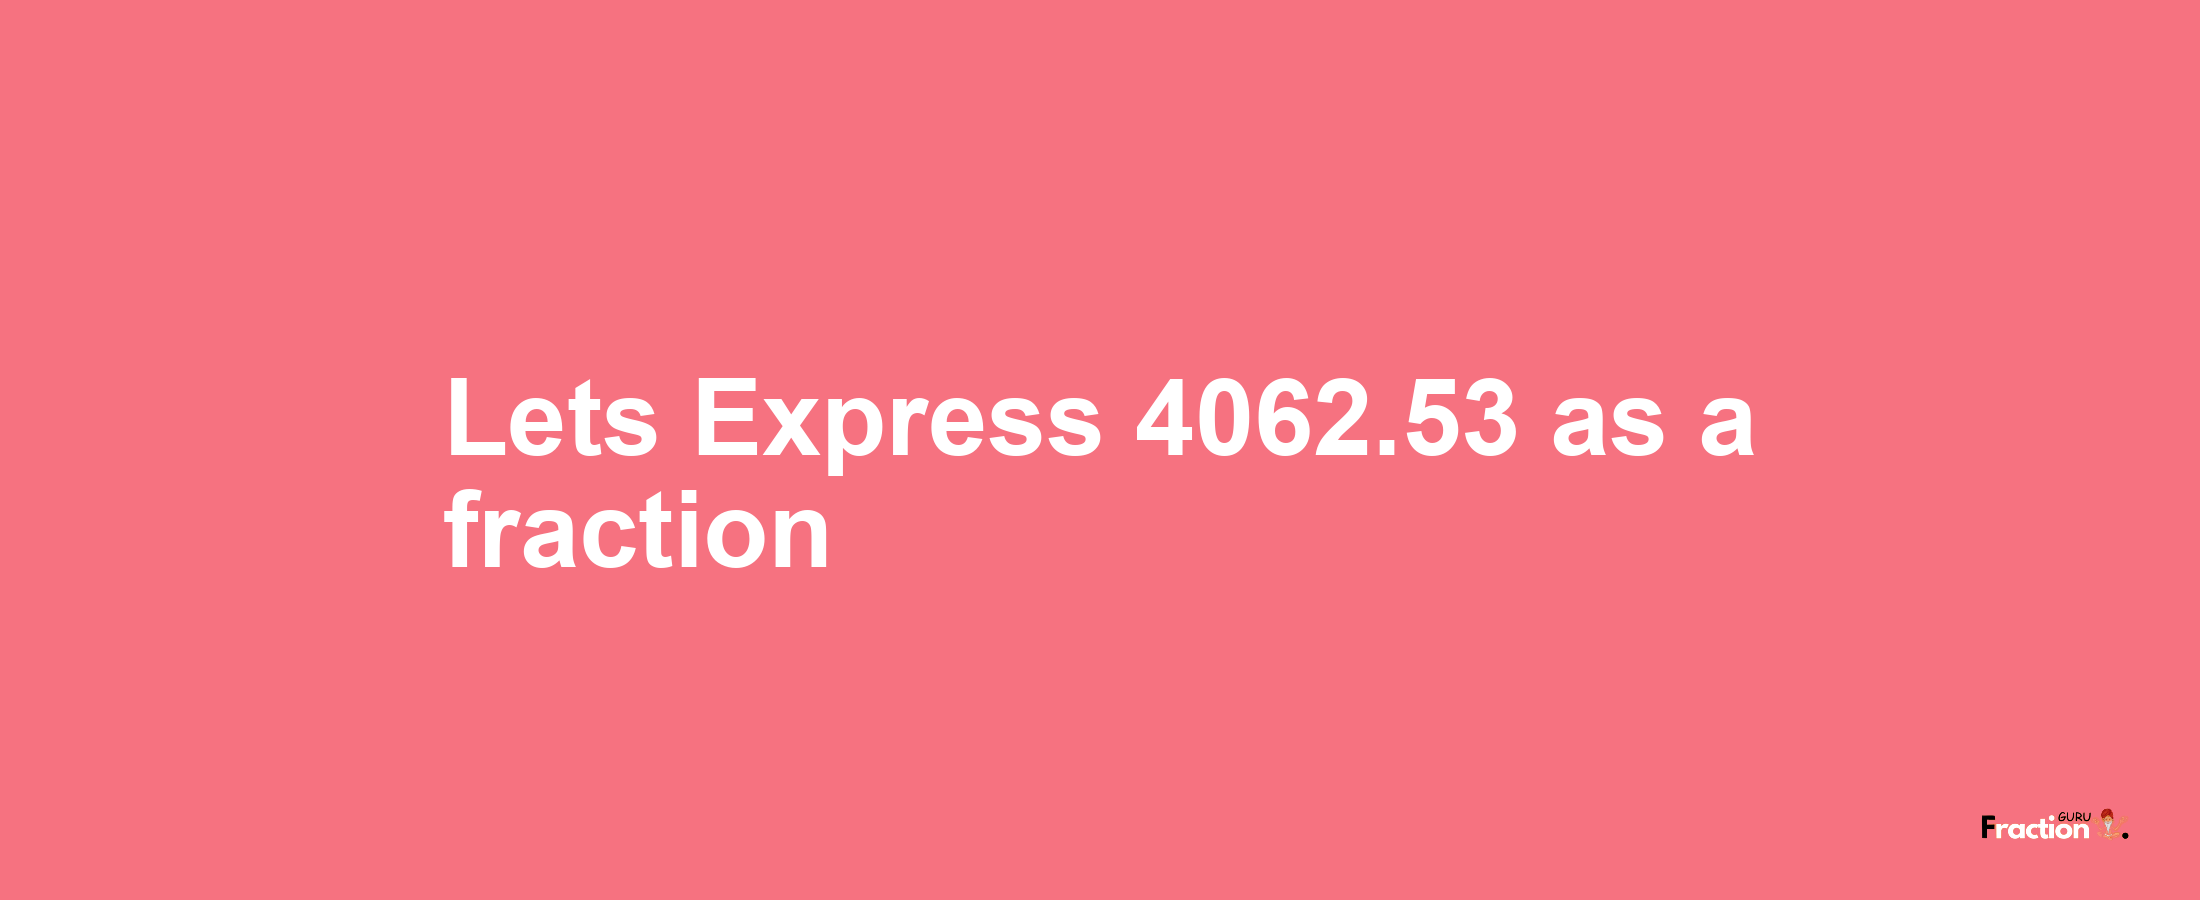 Lets Express 4062.53 as afraction